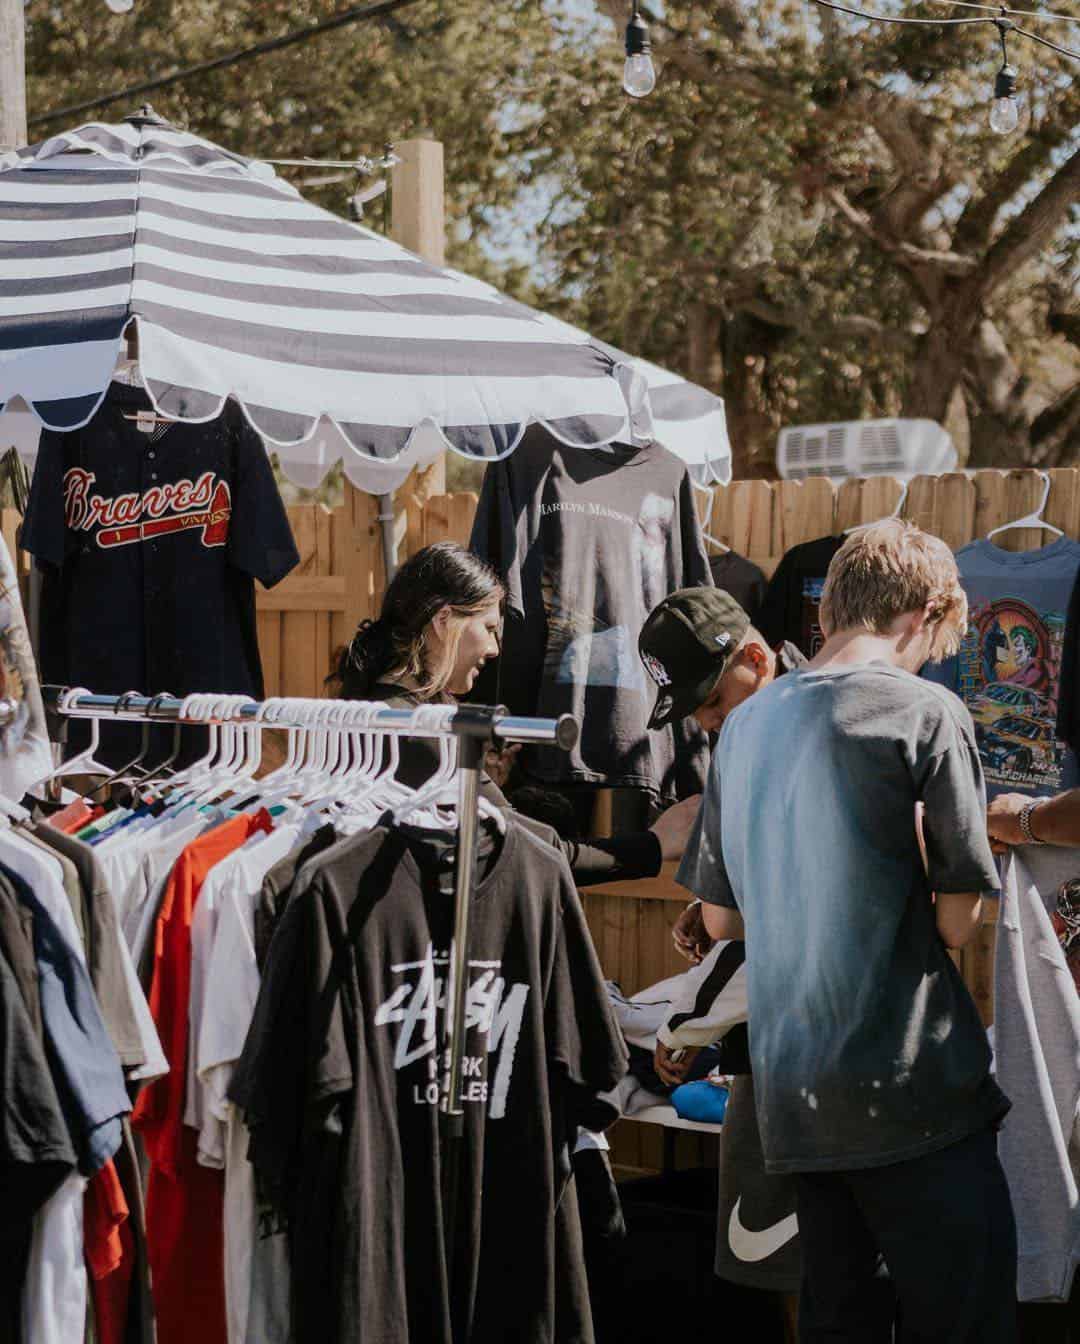 People at a thrift market outside